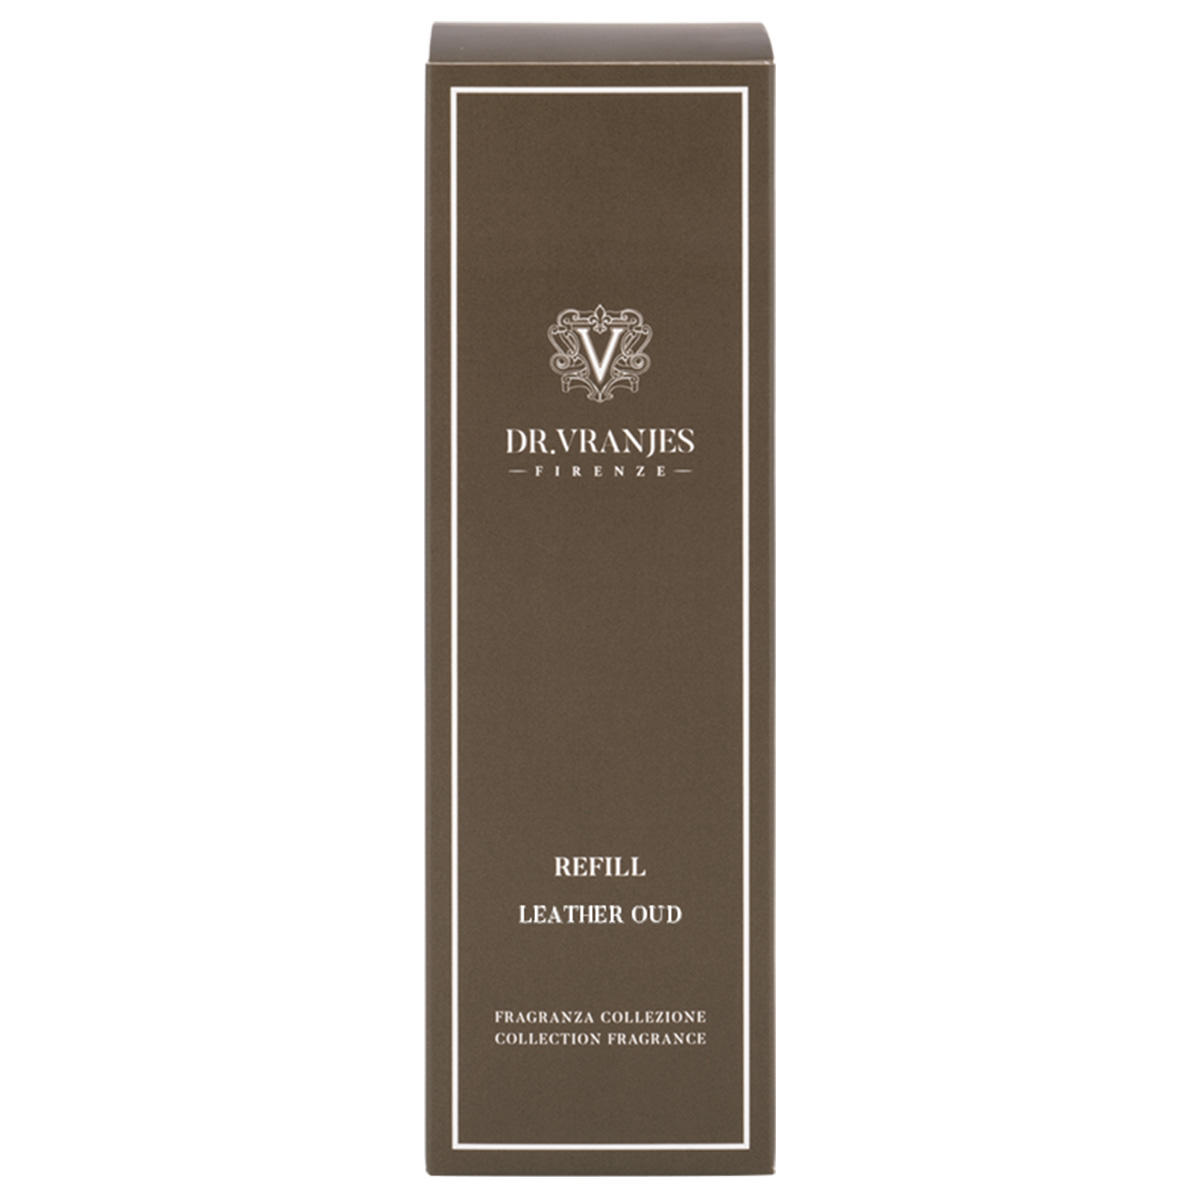 DR. VRANJES FIRENZE Leather Oud Collection Fragrance Refill  - 2